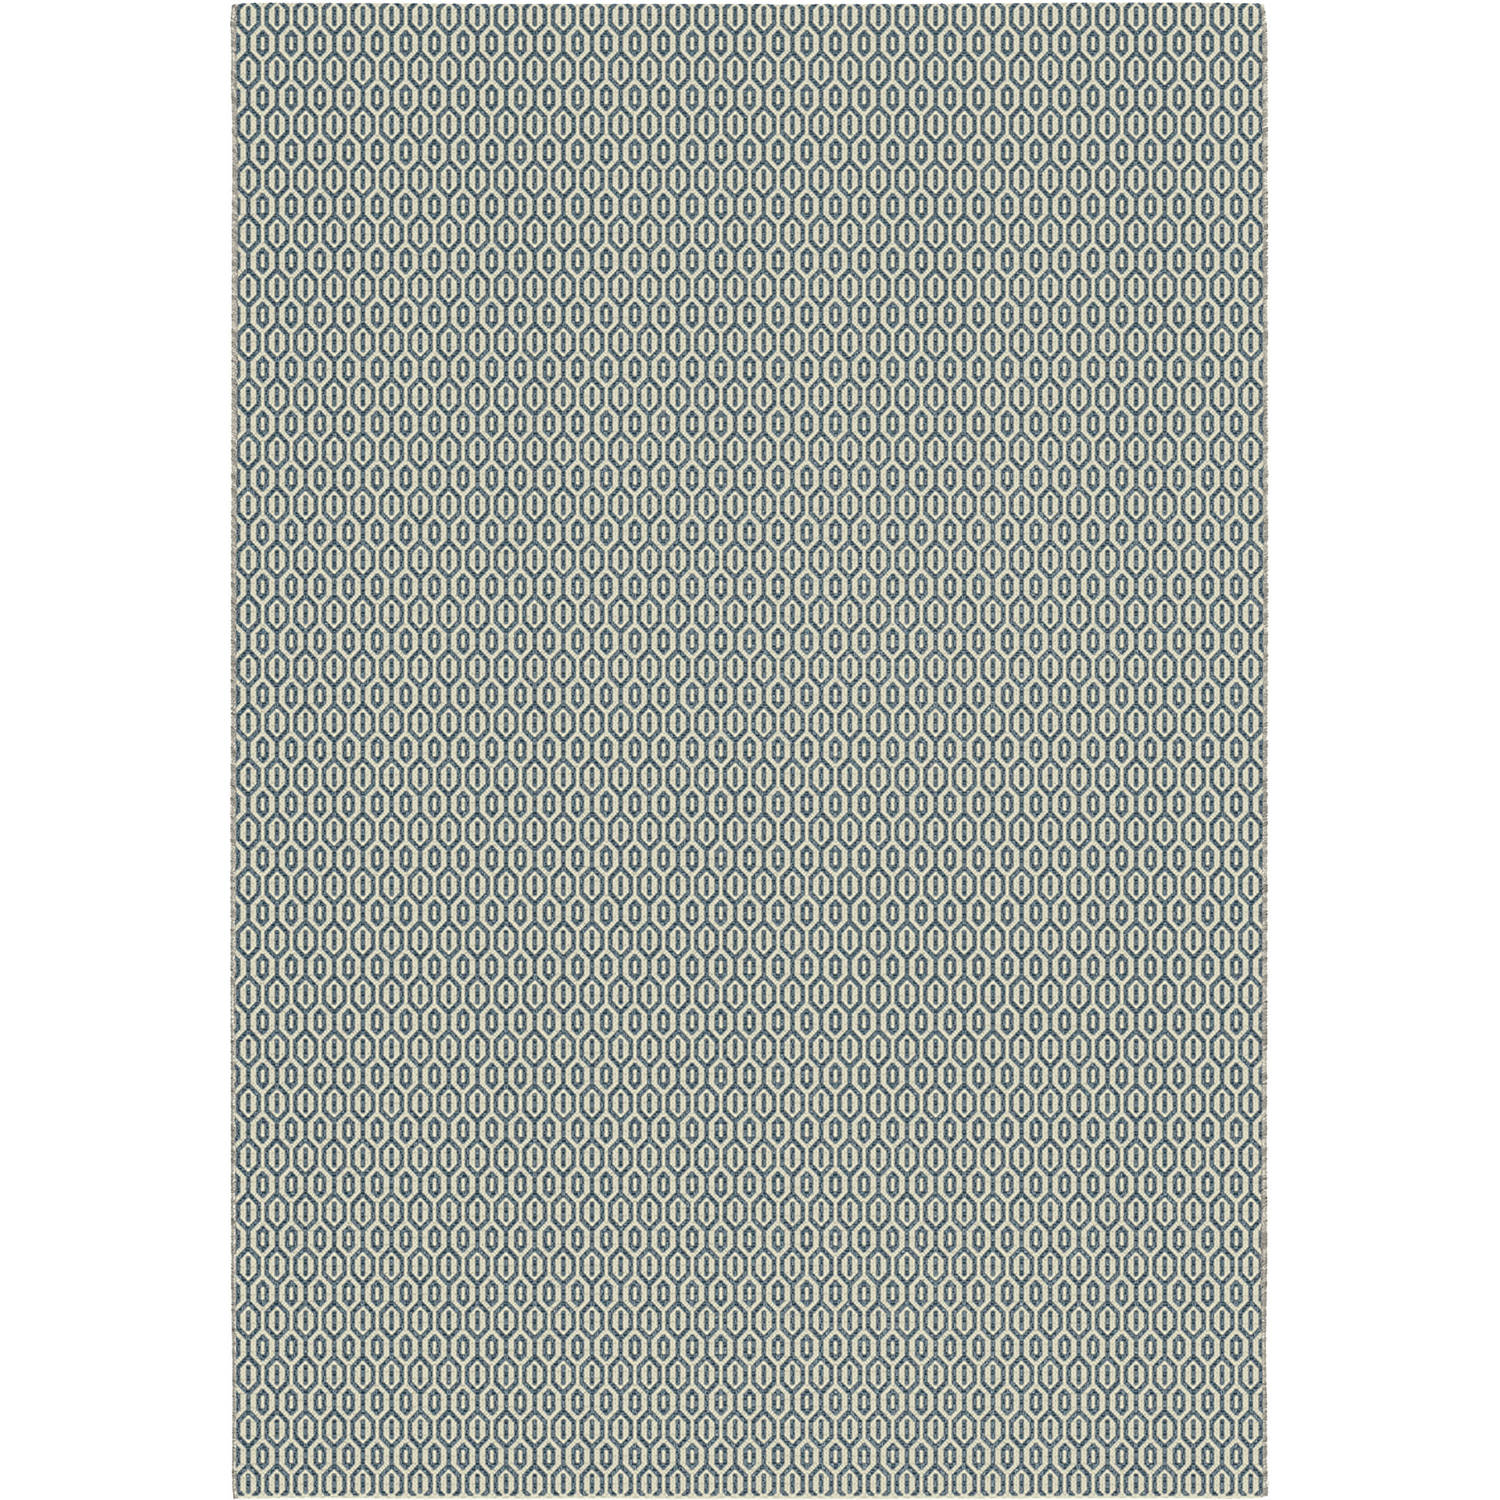 Garden Impressions Pacha buitenkleed 160x230 cm taupe